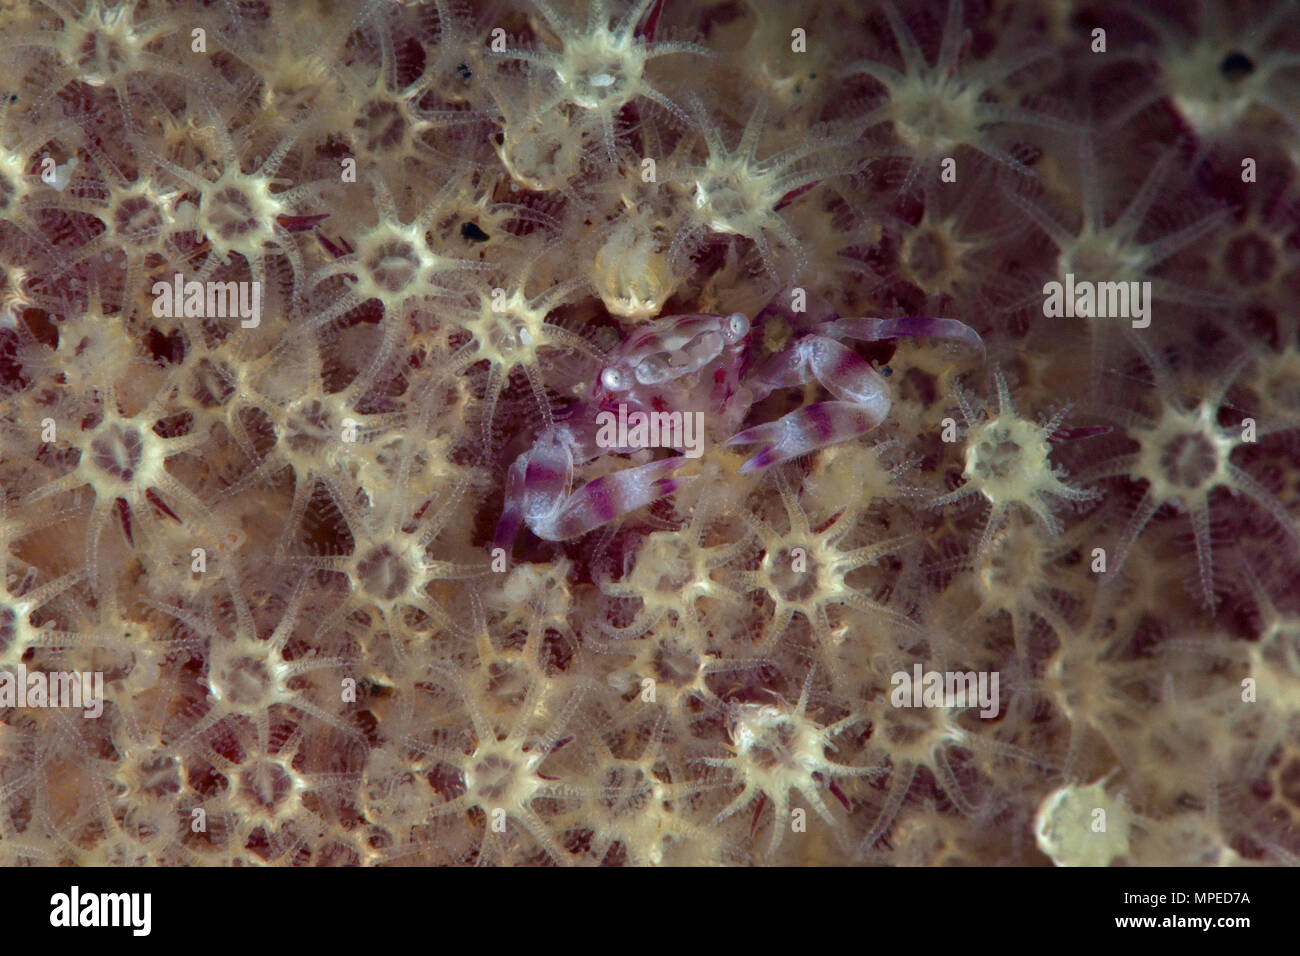 Small Soft Coral Porcelain Crab (Lissoporcellana nakasonei). Picture was taken in Anilao, Philippines Stock Photo